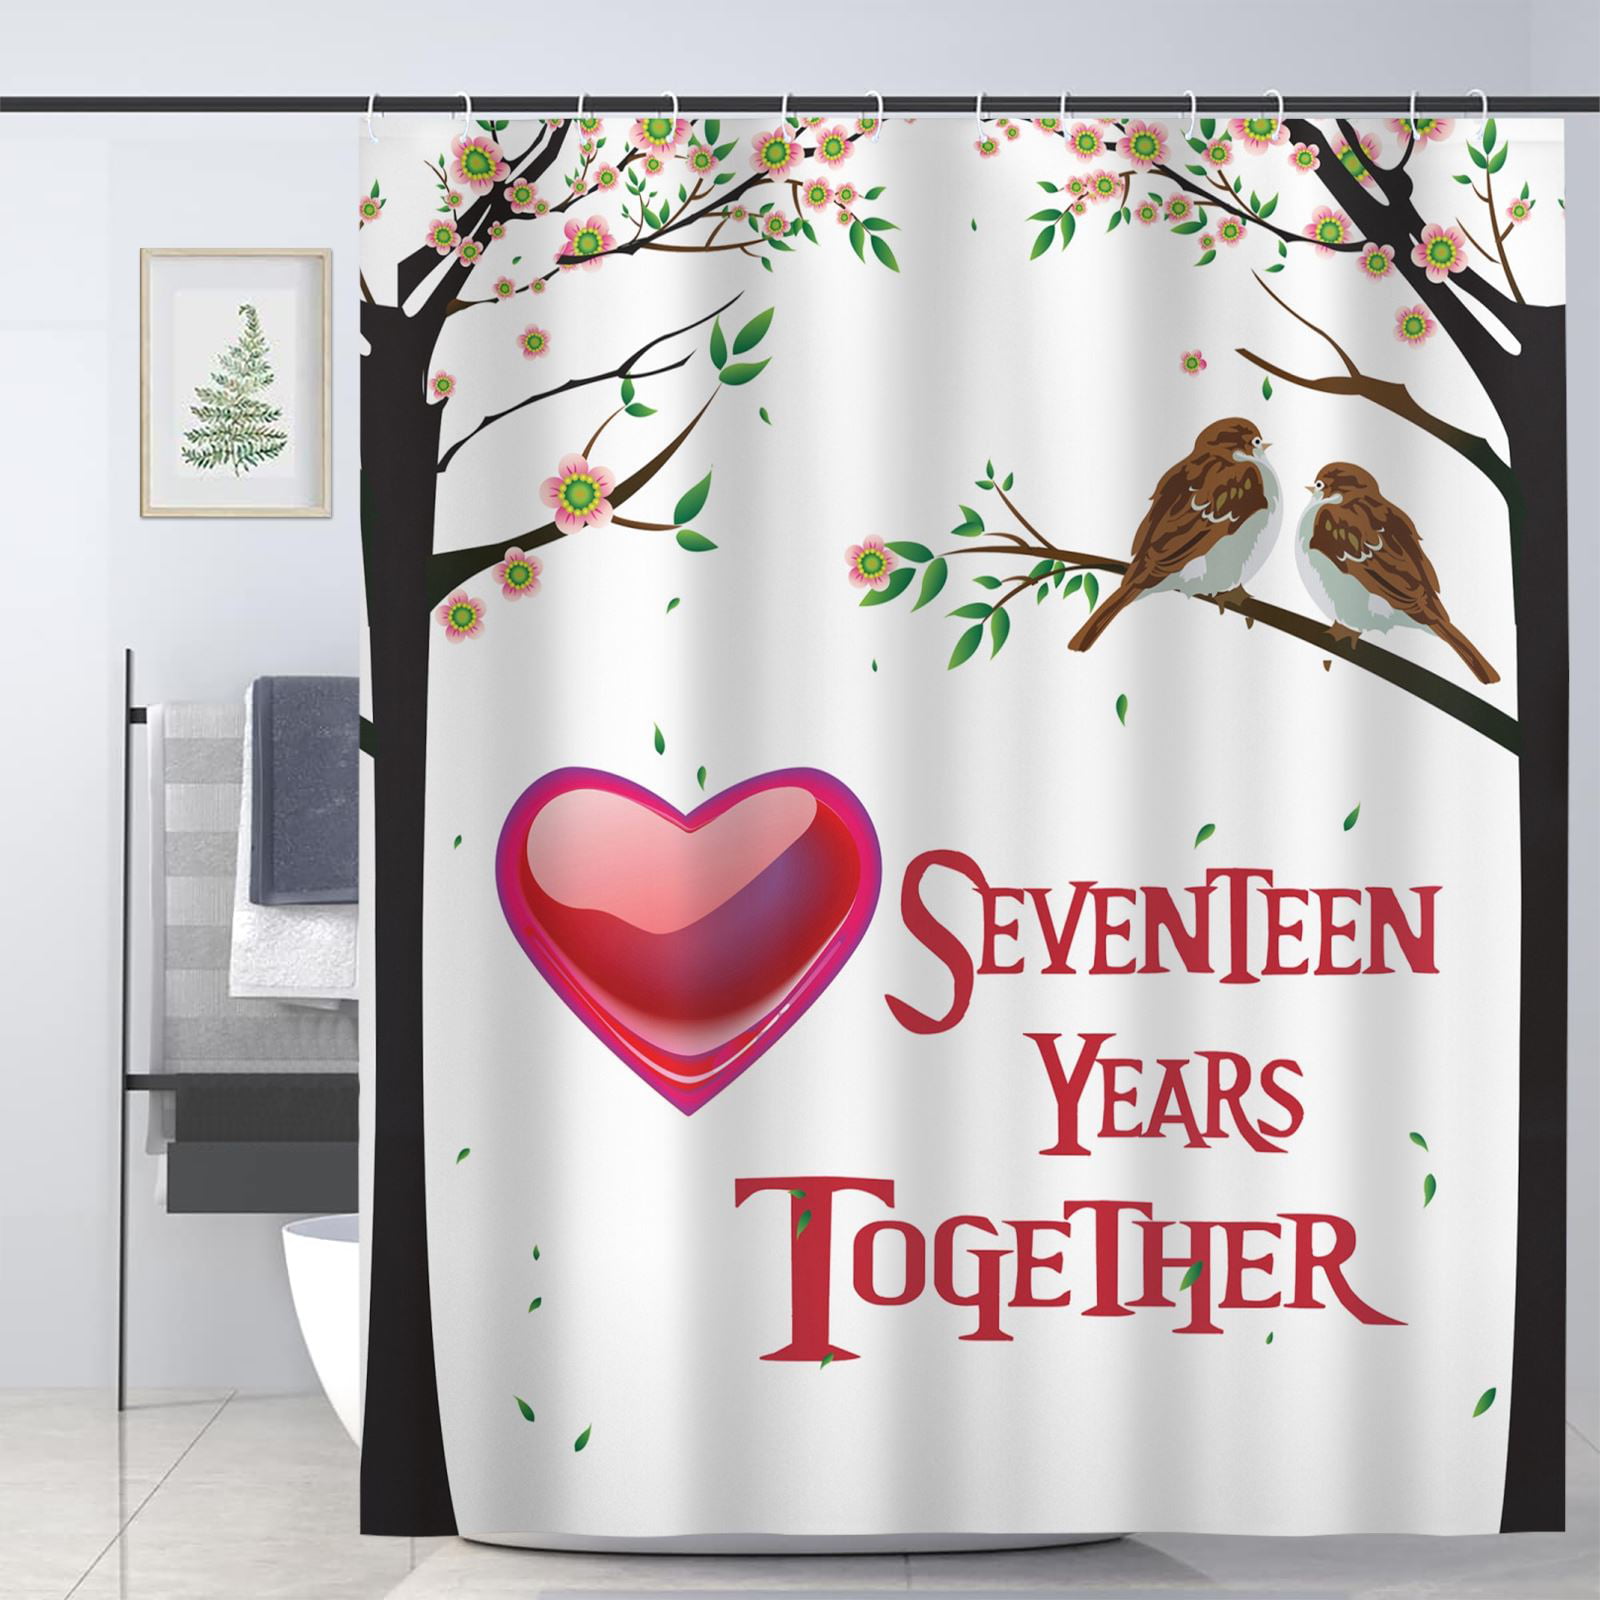 Sonernt 17th Wedding Anniversary Gifts for Couple Red Hearts Art Shower  Curtain for Bathroom Decoration Fabric Shower Curtain set,72x72 